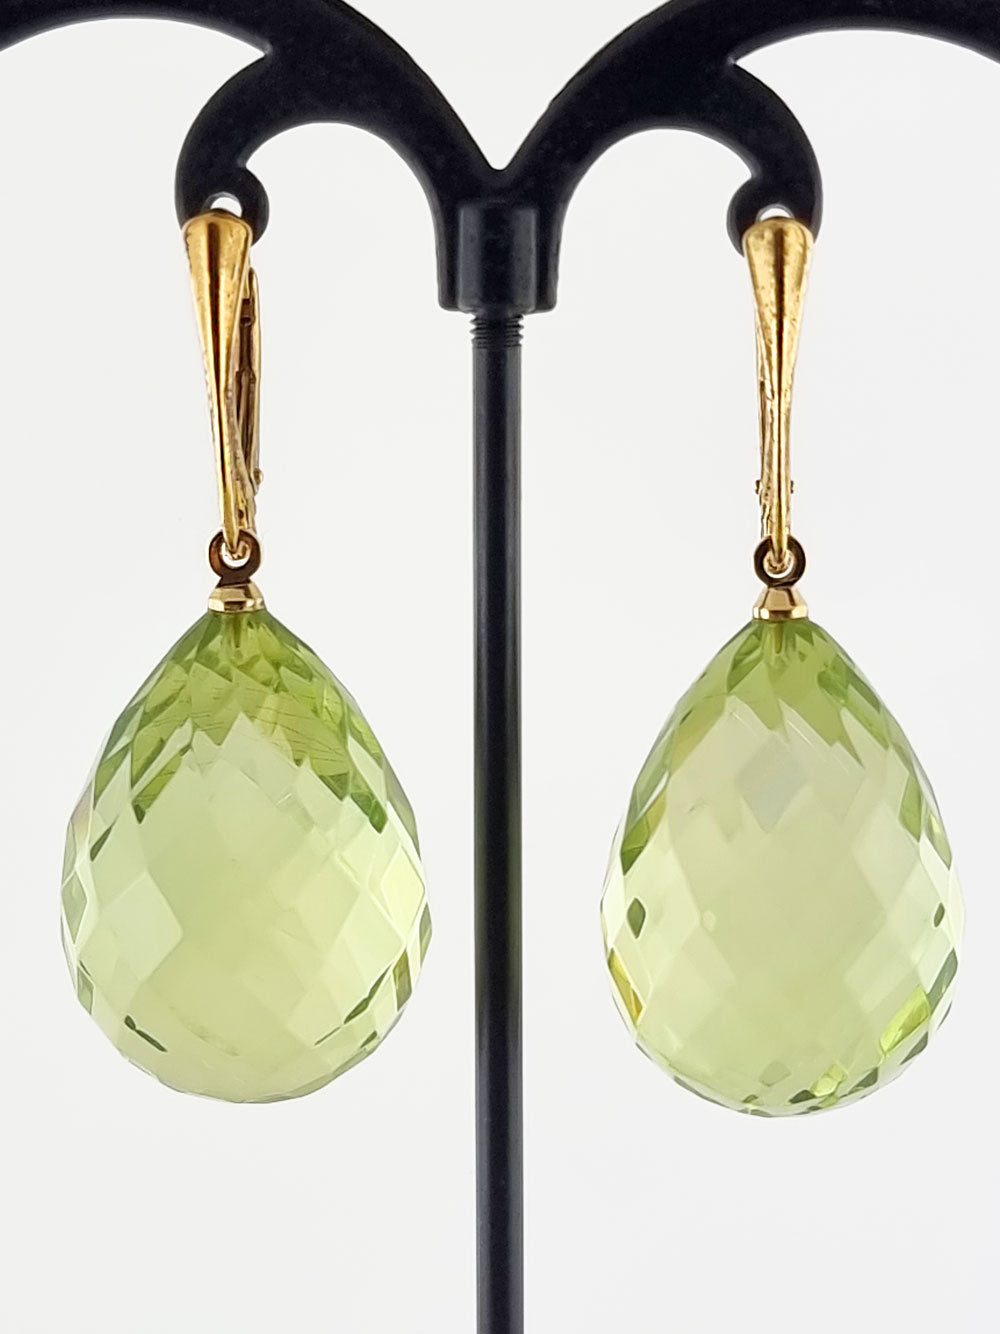 Faceted Green Amber Drop Dangle Earrings 14k Gold Plated